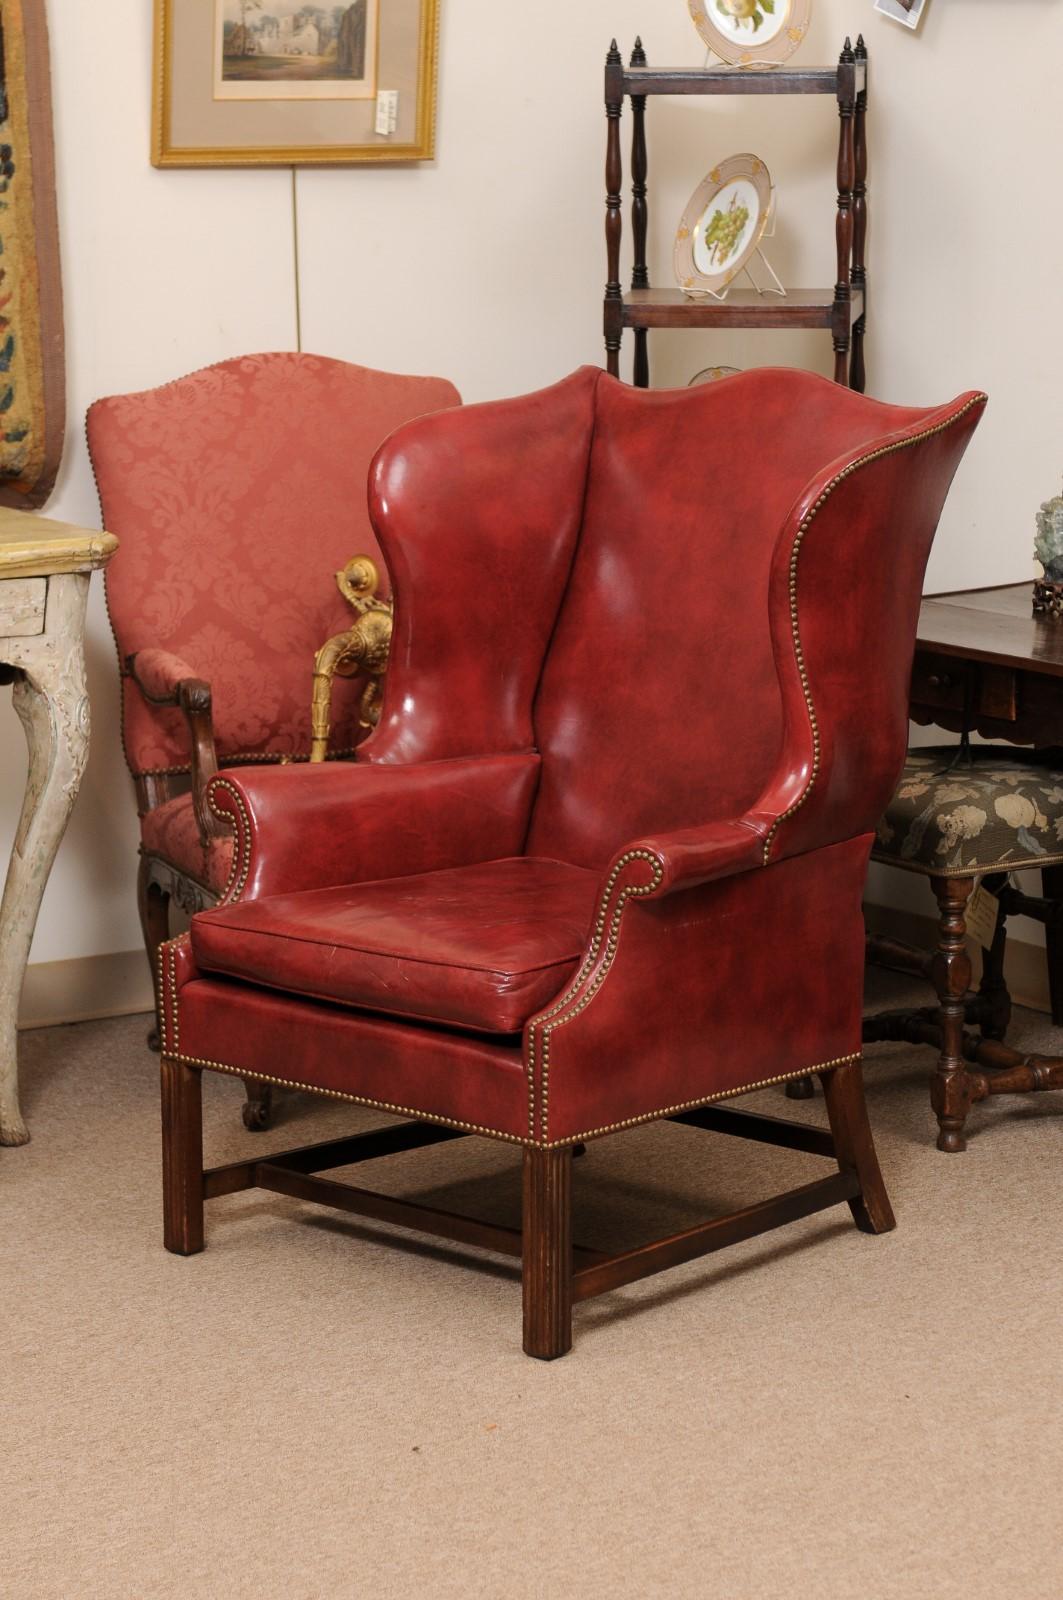 20th Century English Wing Chair in Mahogany & Red Leather Upholstery with Brass  For Sale 1